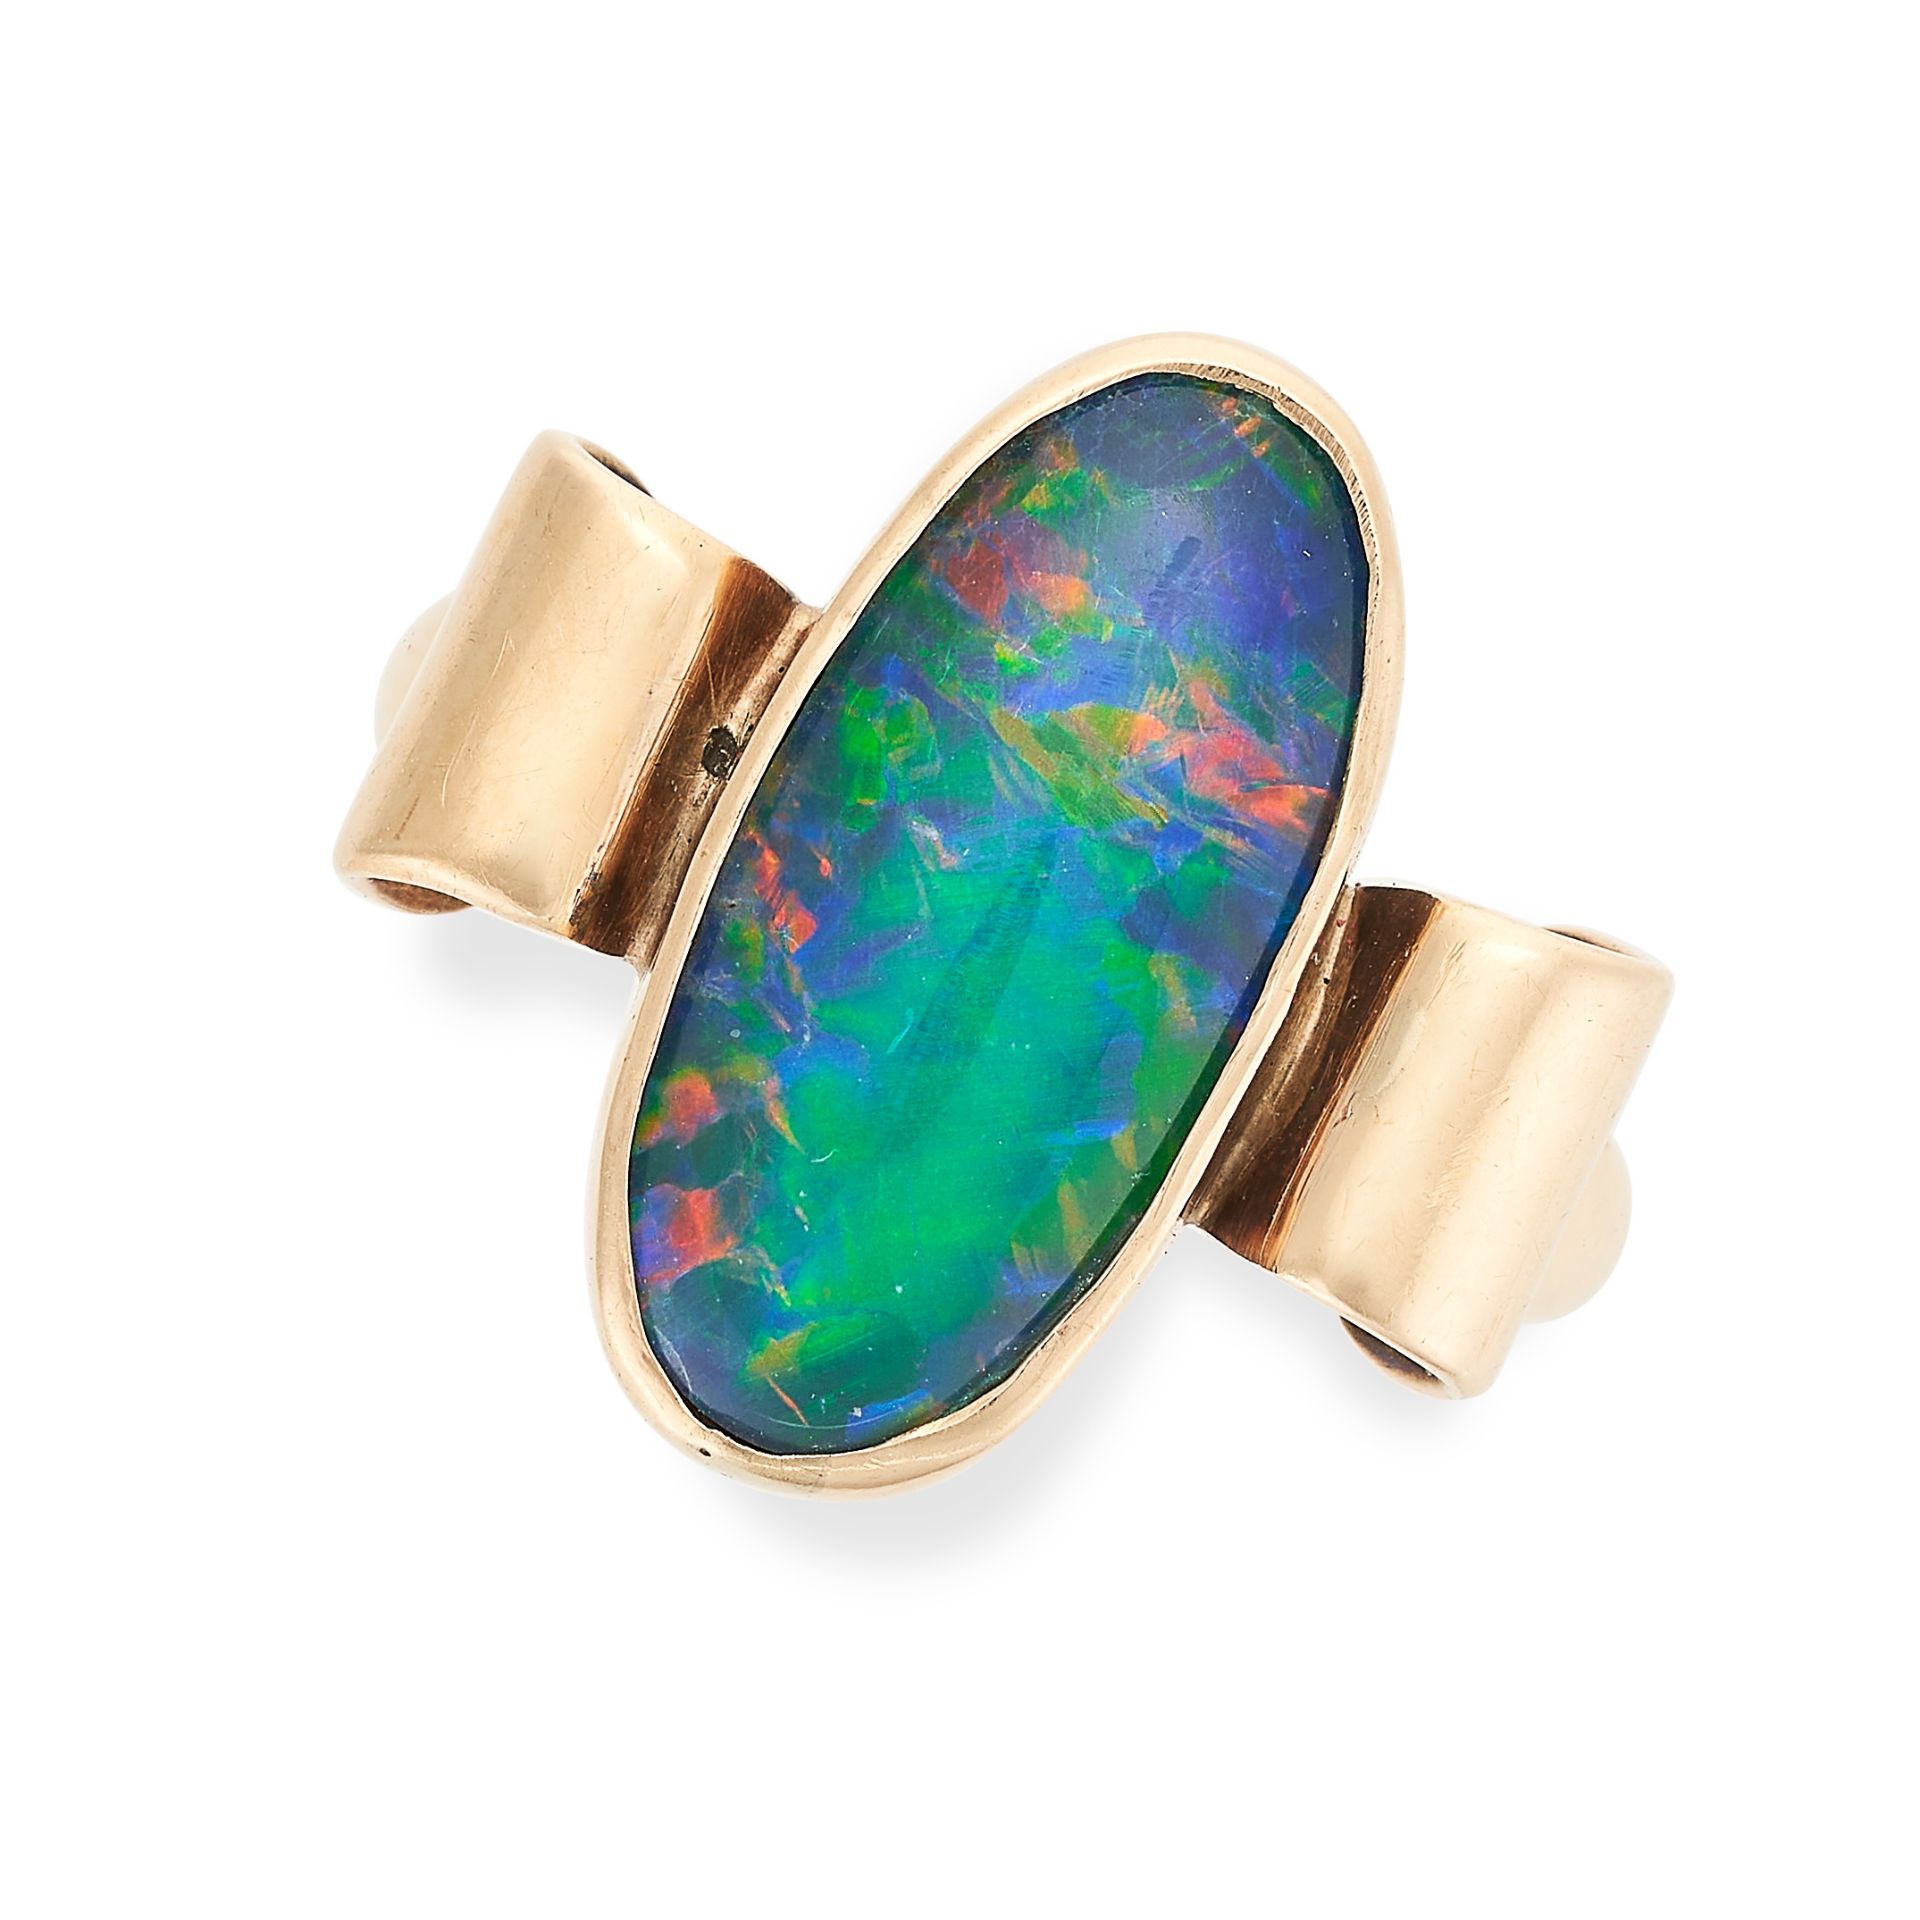 A VINTAGE OPAL RING in 9ct yellow gold, set with a black opal triplet between scrolling motifs,